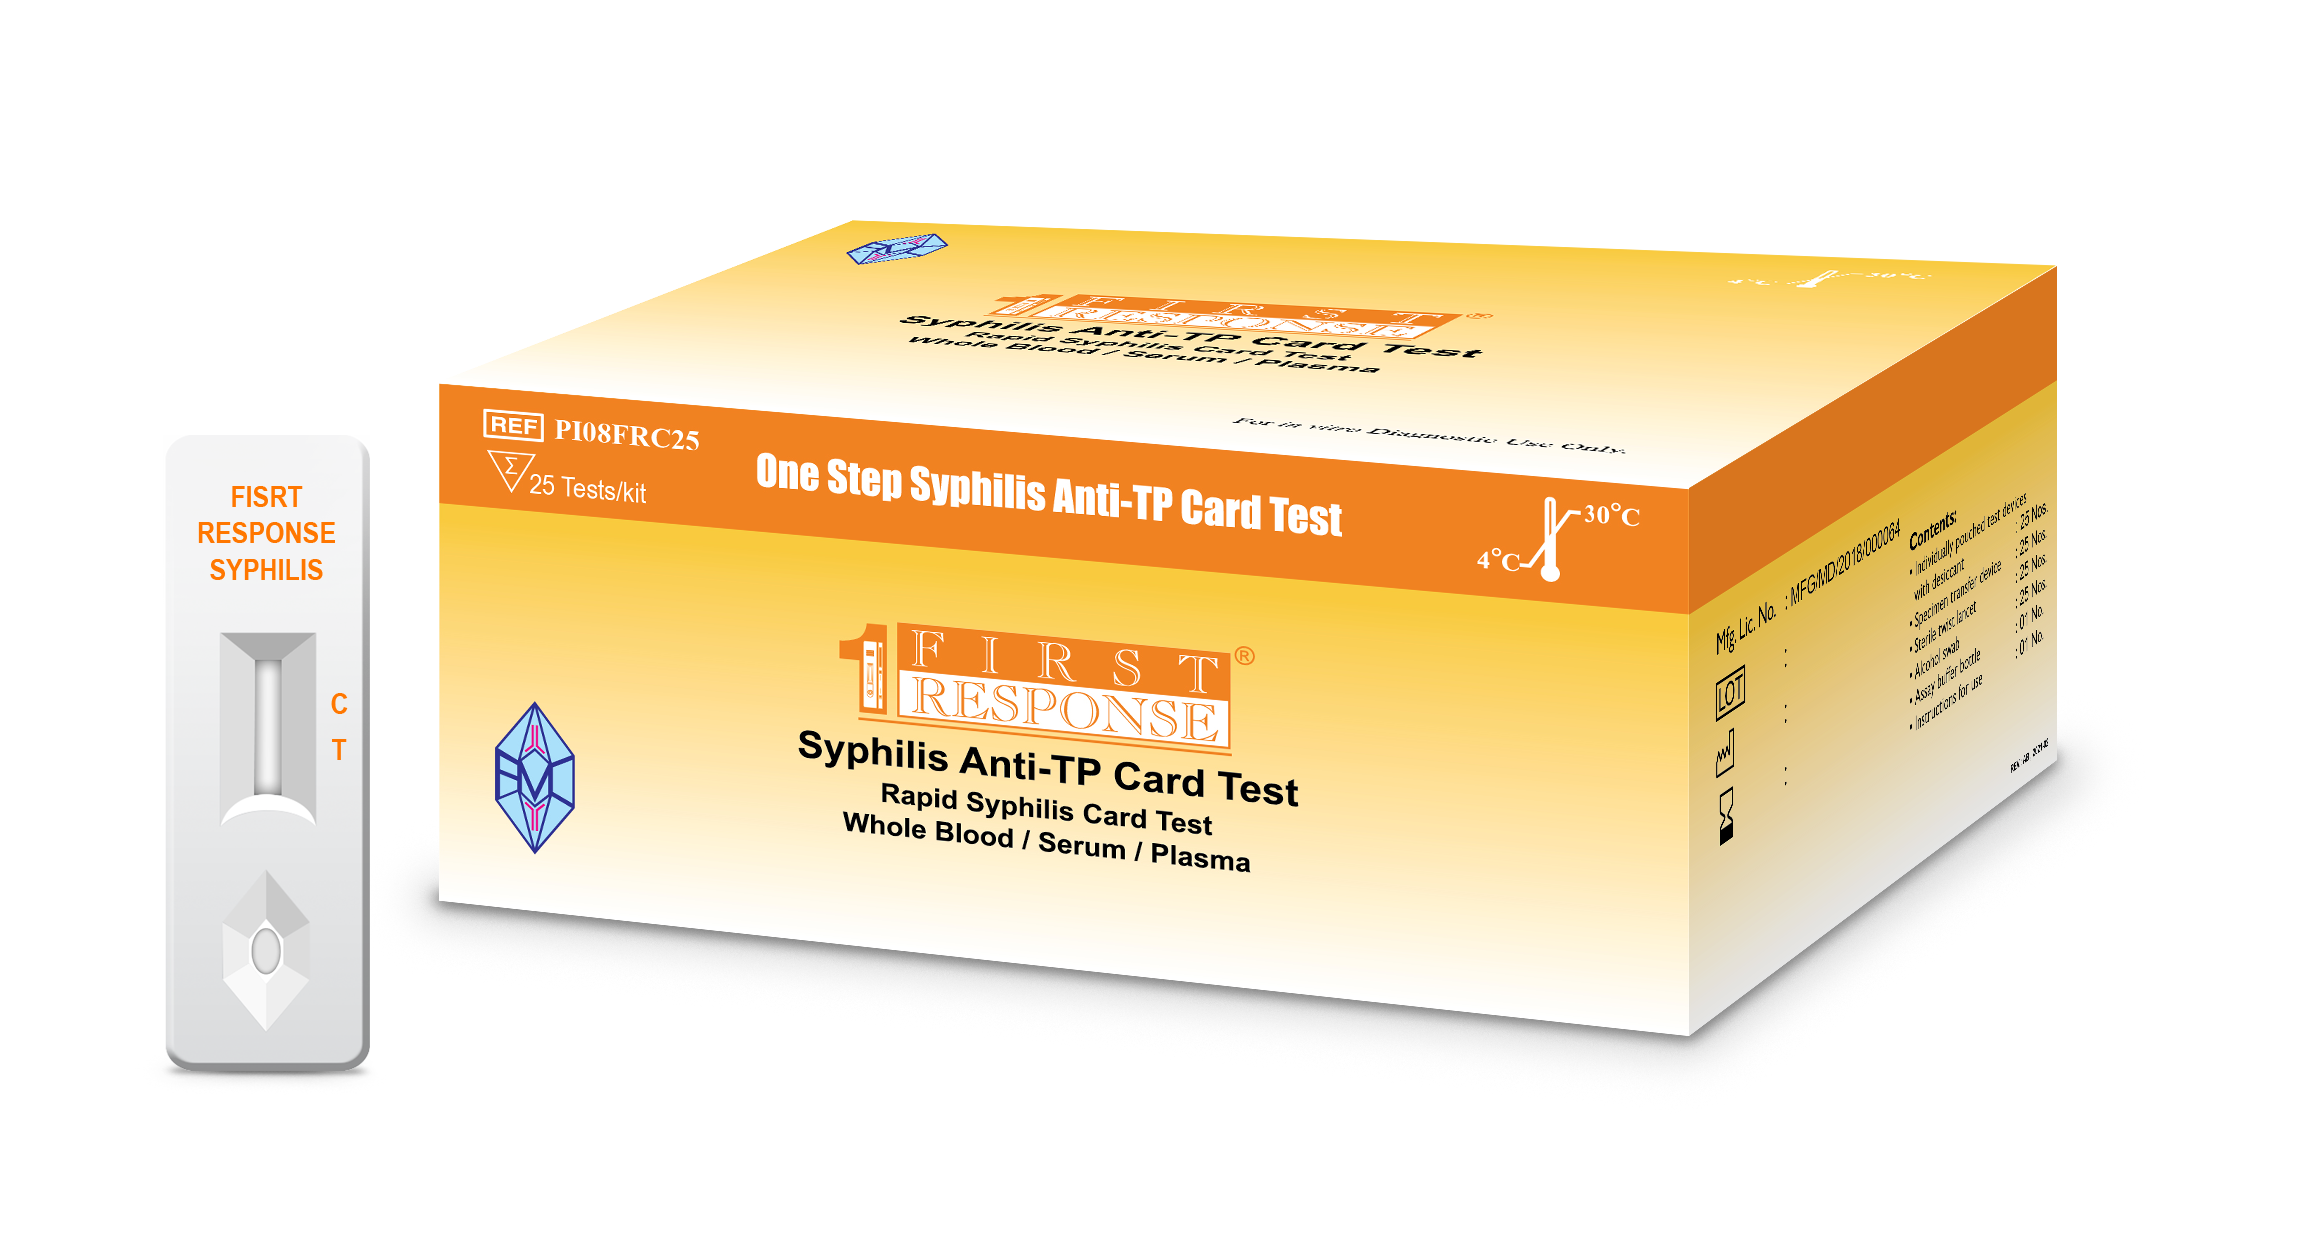 First Response® Syphilis Anti-TP Card Test